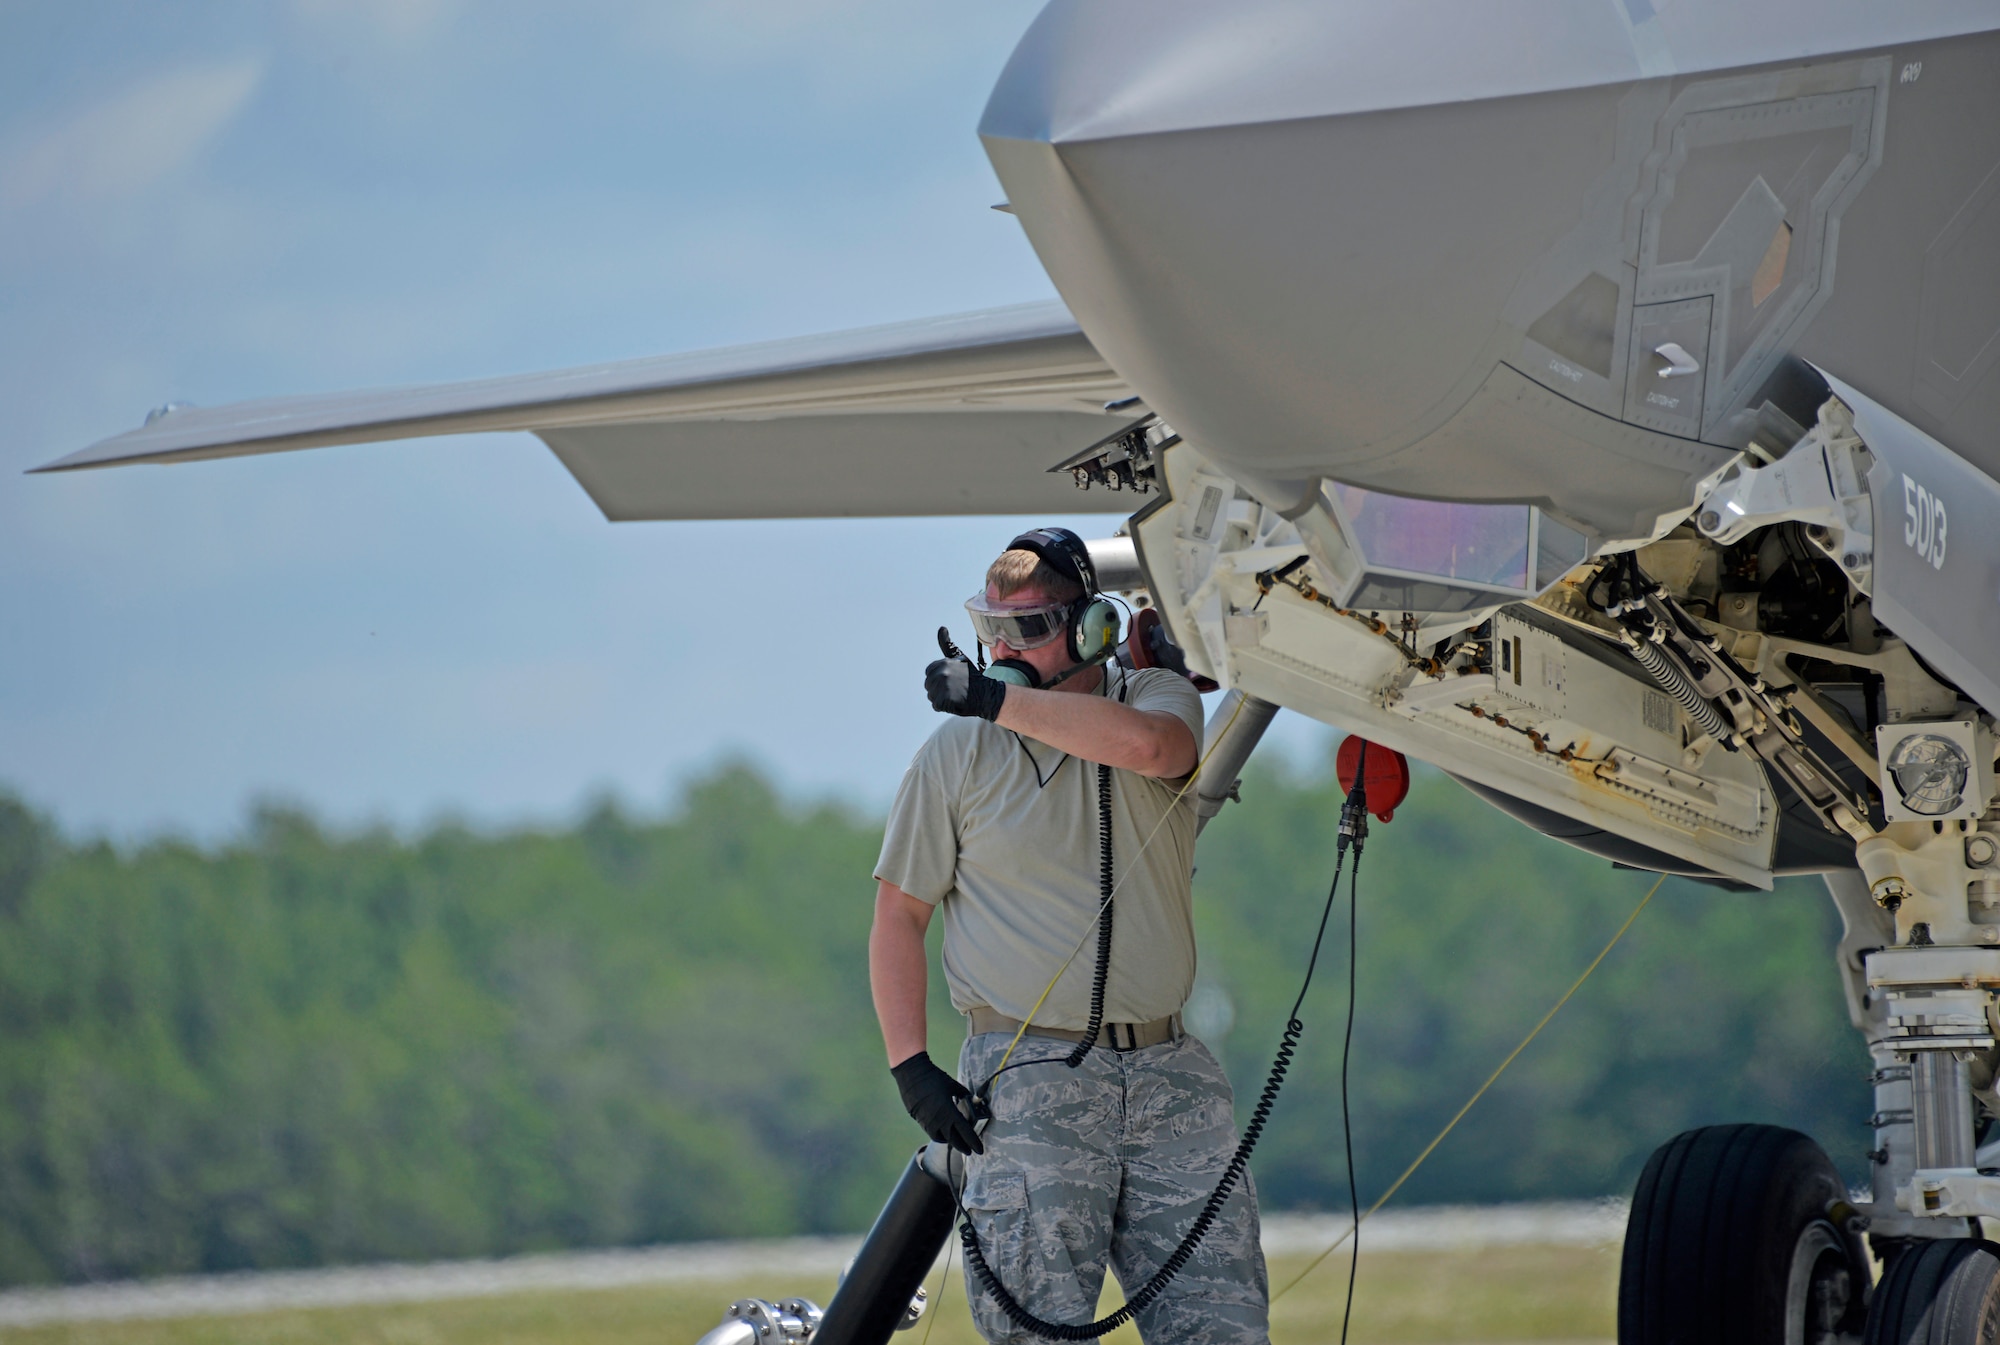 Senior Airman Max Todd, 33rd Aircraft Maintenance Squadron crew chief, signals a successful hook-up during the hot pit refueling of an F-35A Lightning II at Eglin Air Force Base, Fla., May 13, 2016. The engines are left running during this type of refueling so pilots are able to return to the air quickly. It can take as little as 20 minutes for a crew chief to fill the nearly 17,000 pound fuel tank. (U.S. Air Force photo/Senior Airman Andrea Posey)